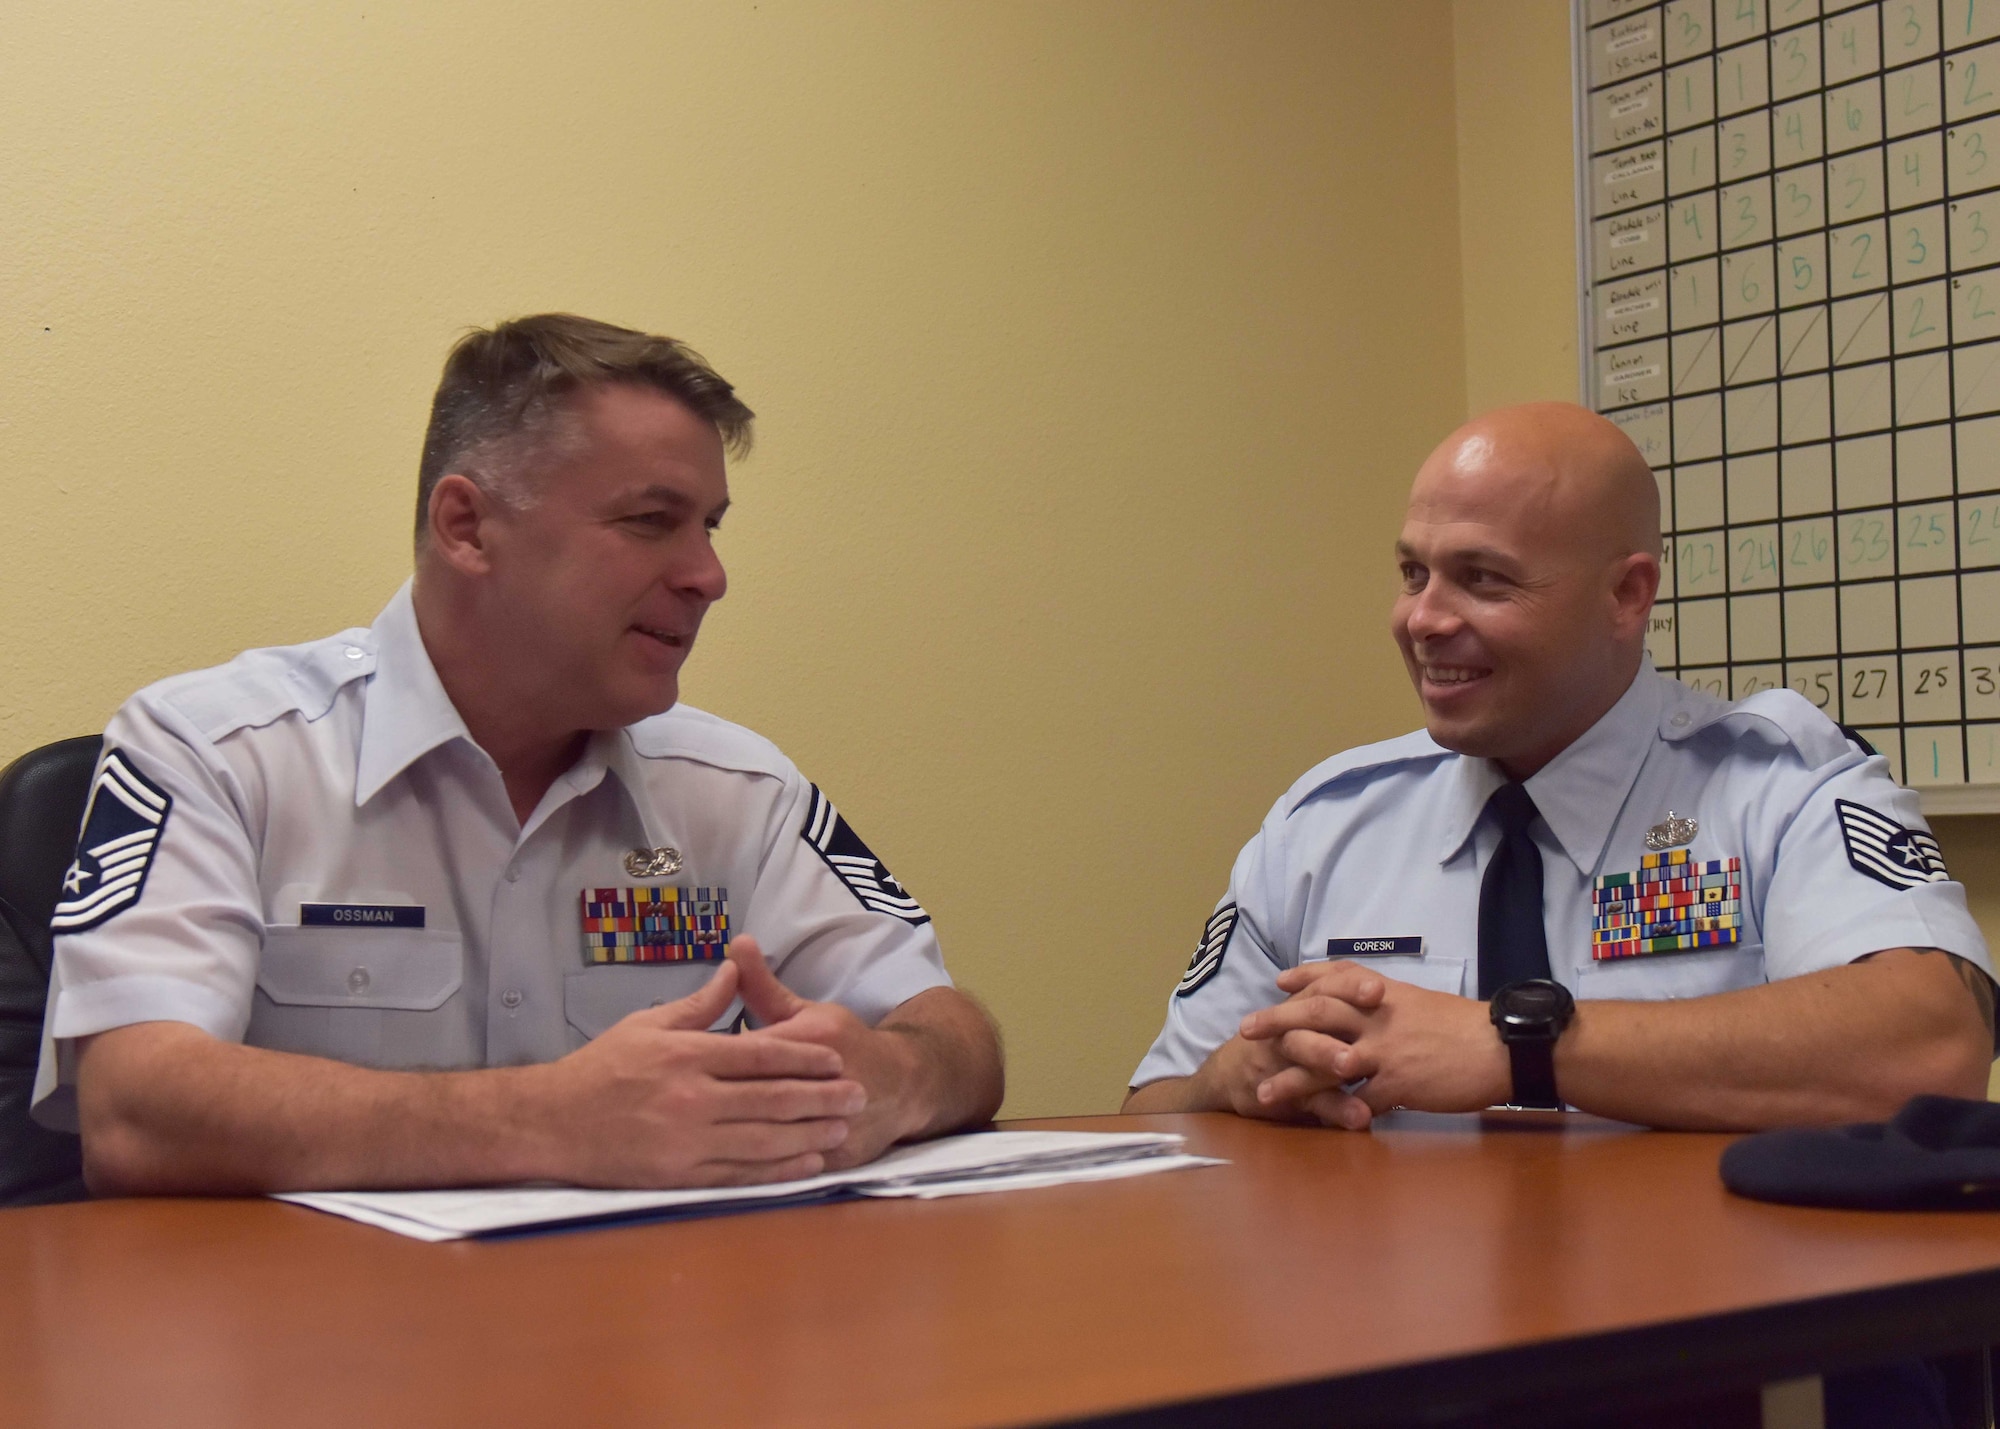 Many members of the 944th Fighter Wing began their journey with the 944th FW recruiting service, which recently welcomed its new flight chief, Senior Master Sgt. Jeffrey Ossman.Ossman is new to Phoenix and the 944th FW, but comes in with over 14 years of U.S. Air Force recruiting experience.